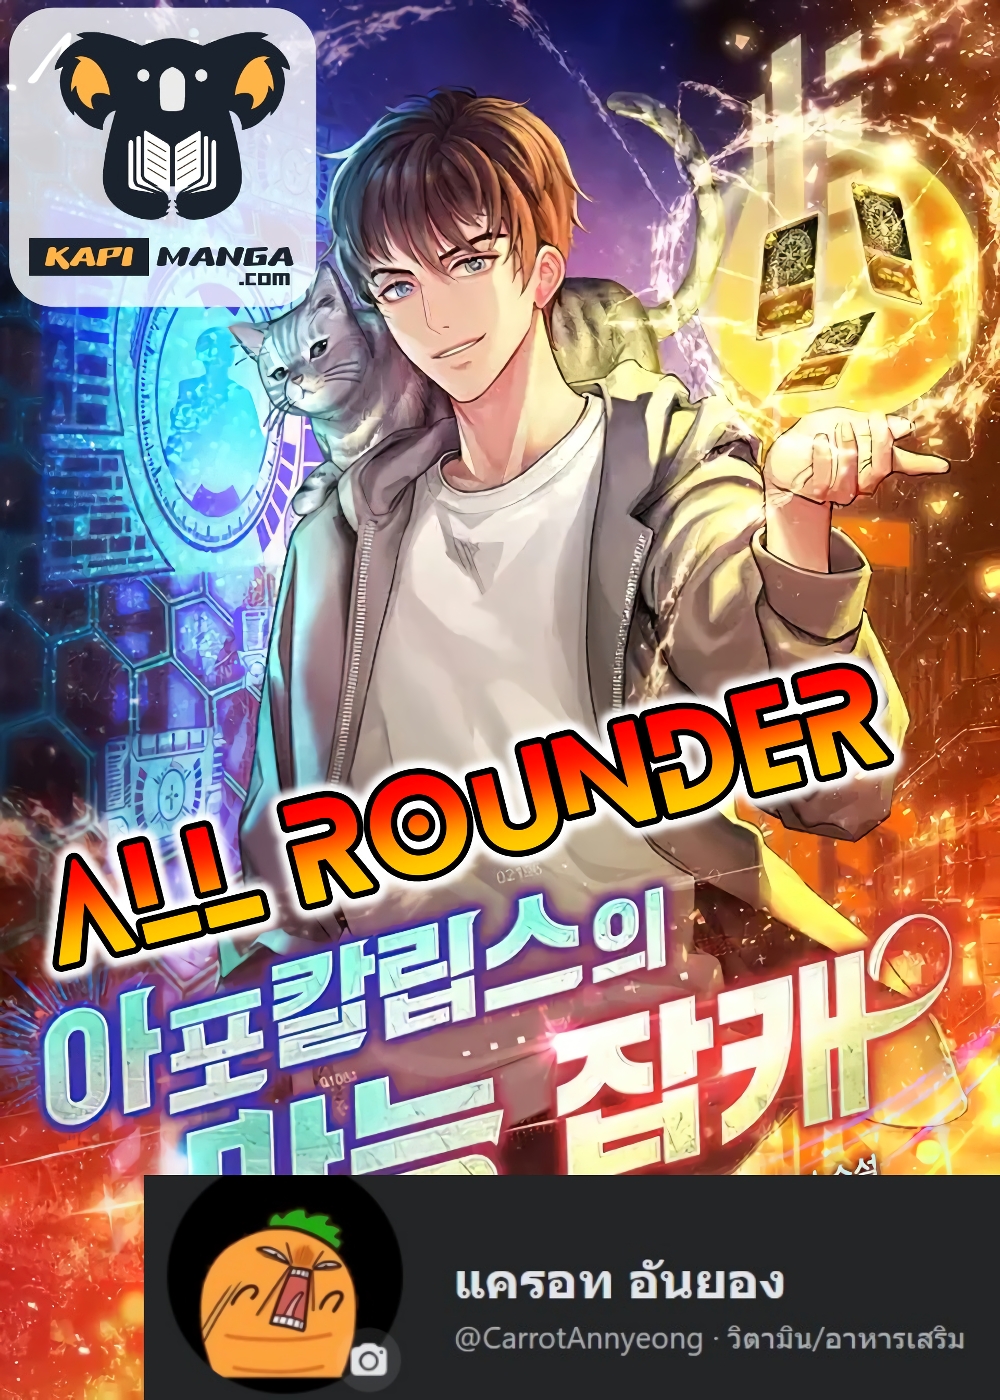 All Rounder 2-2